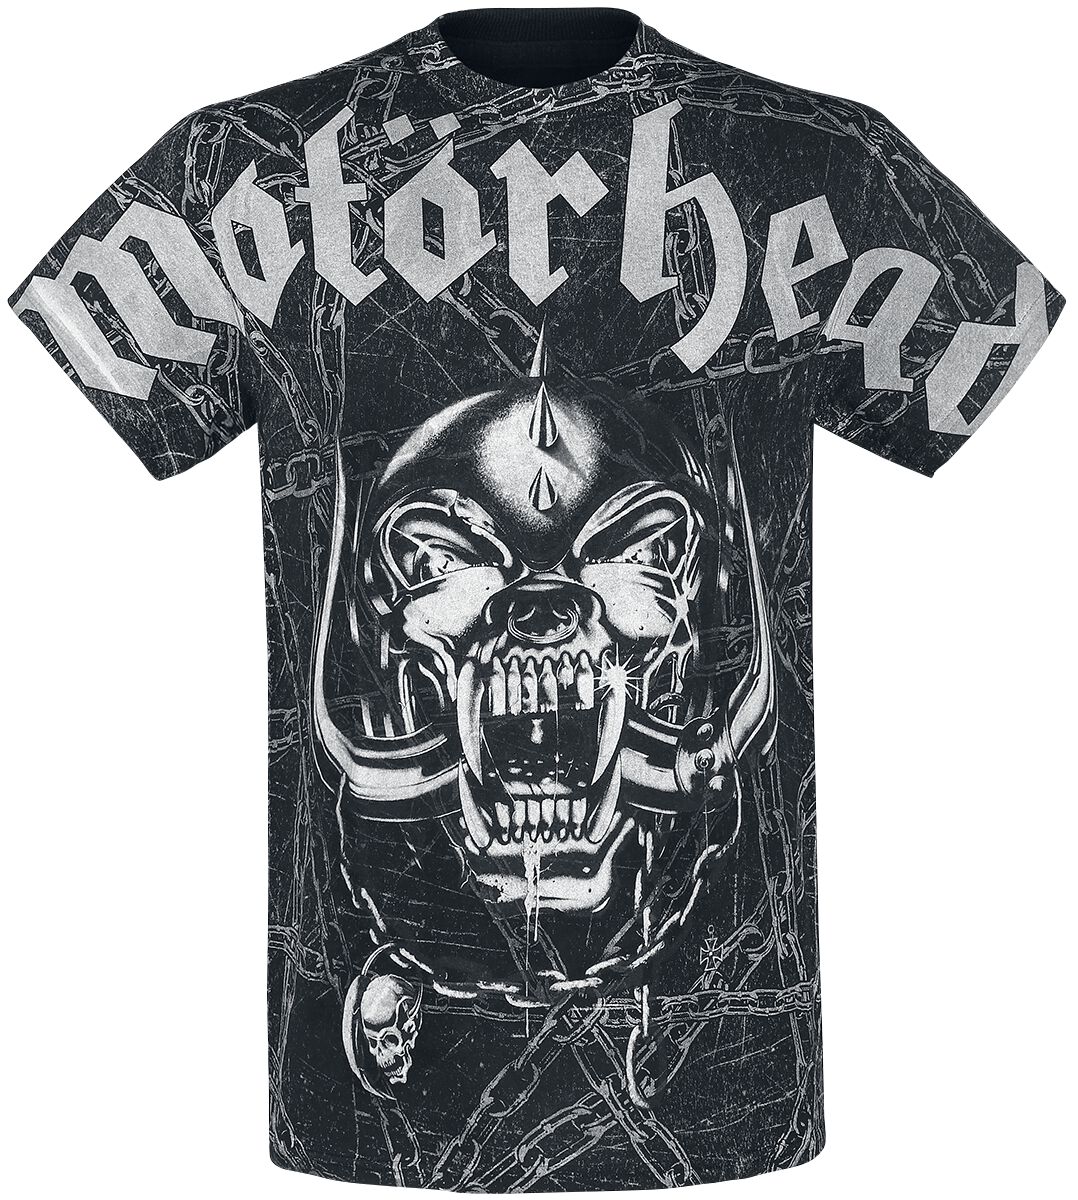 Image of T-Shirt di Motörhead - Dog Skull And Chains Allover - S a XXL - Uomo - stampa allover